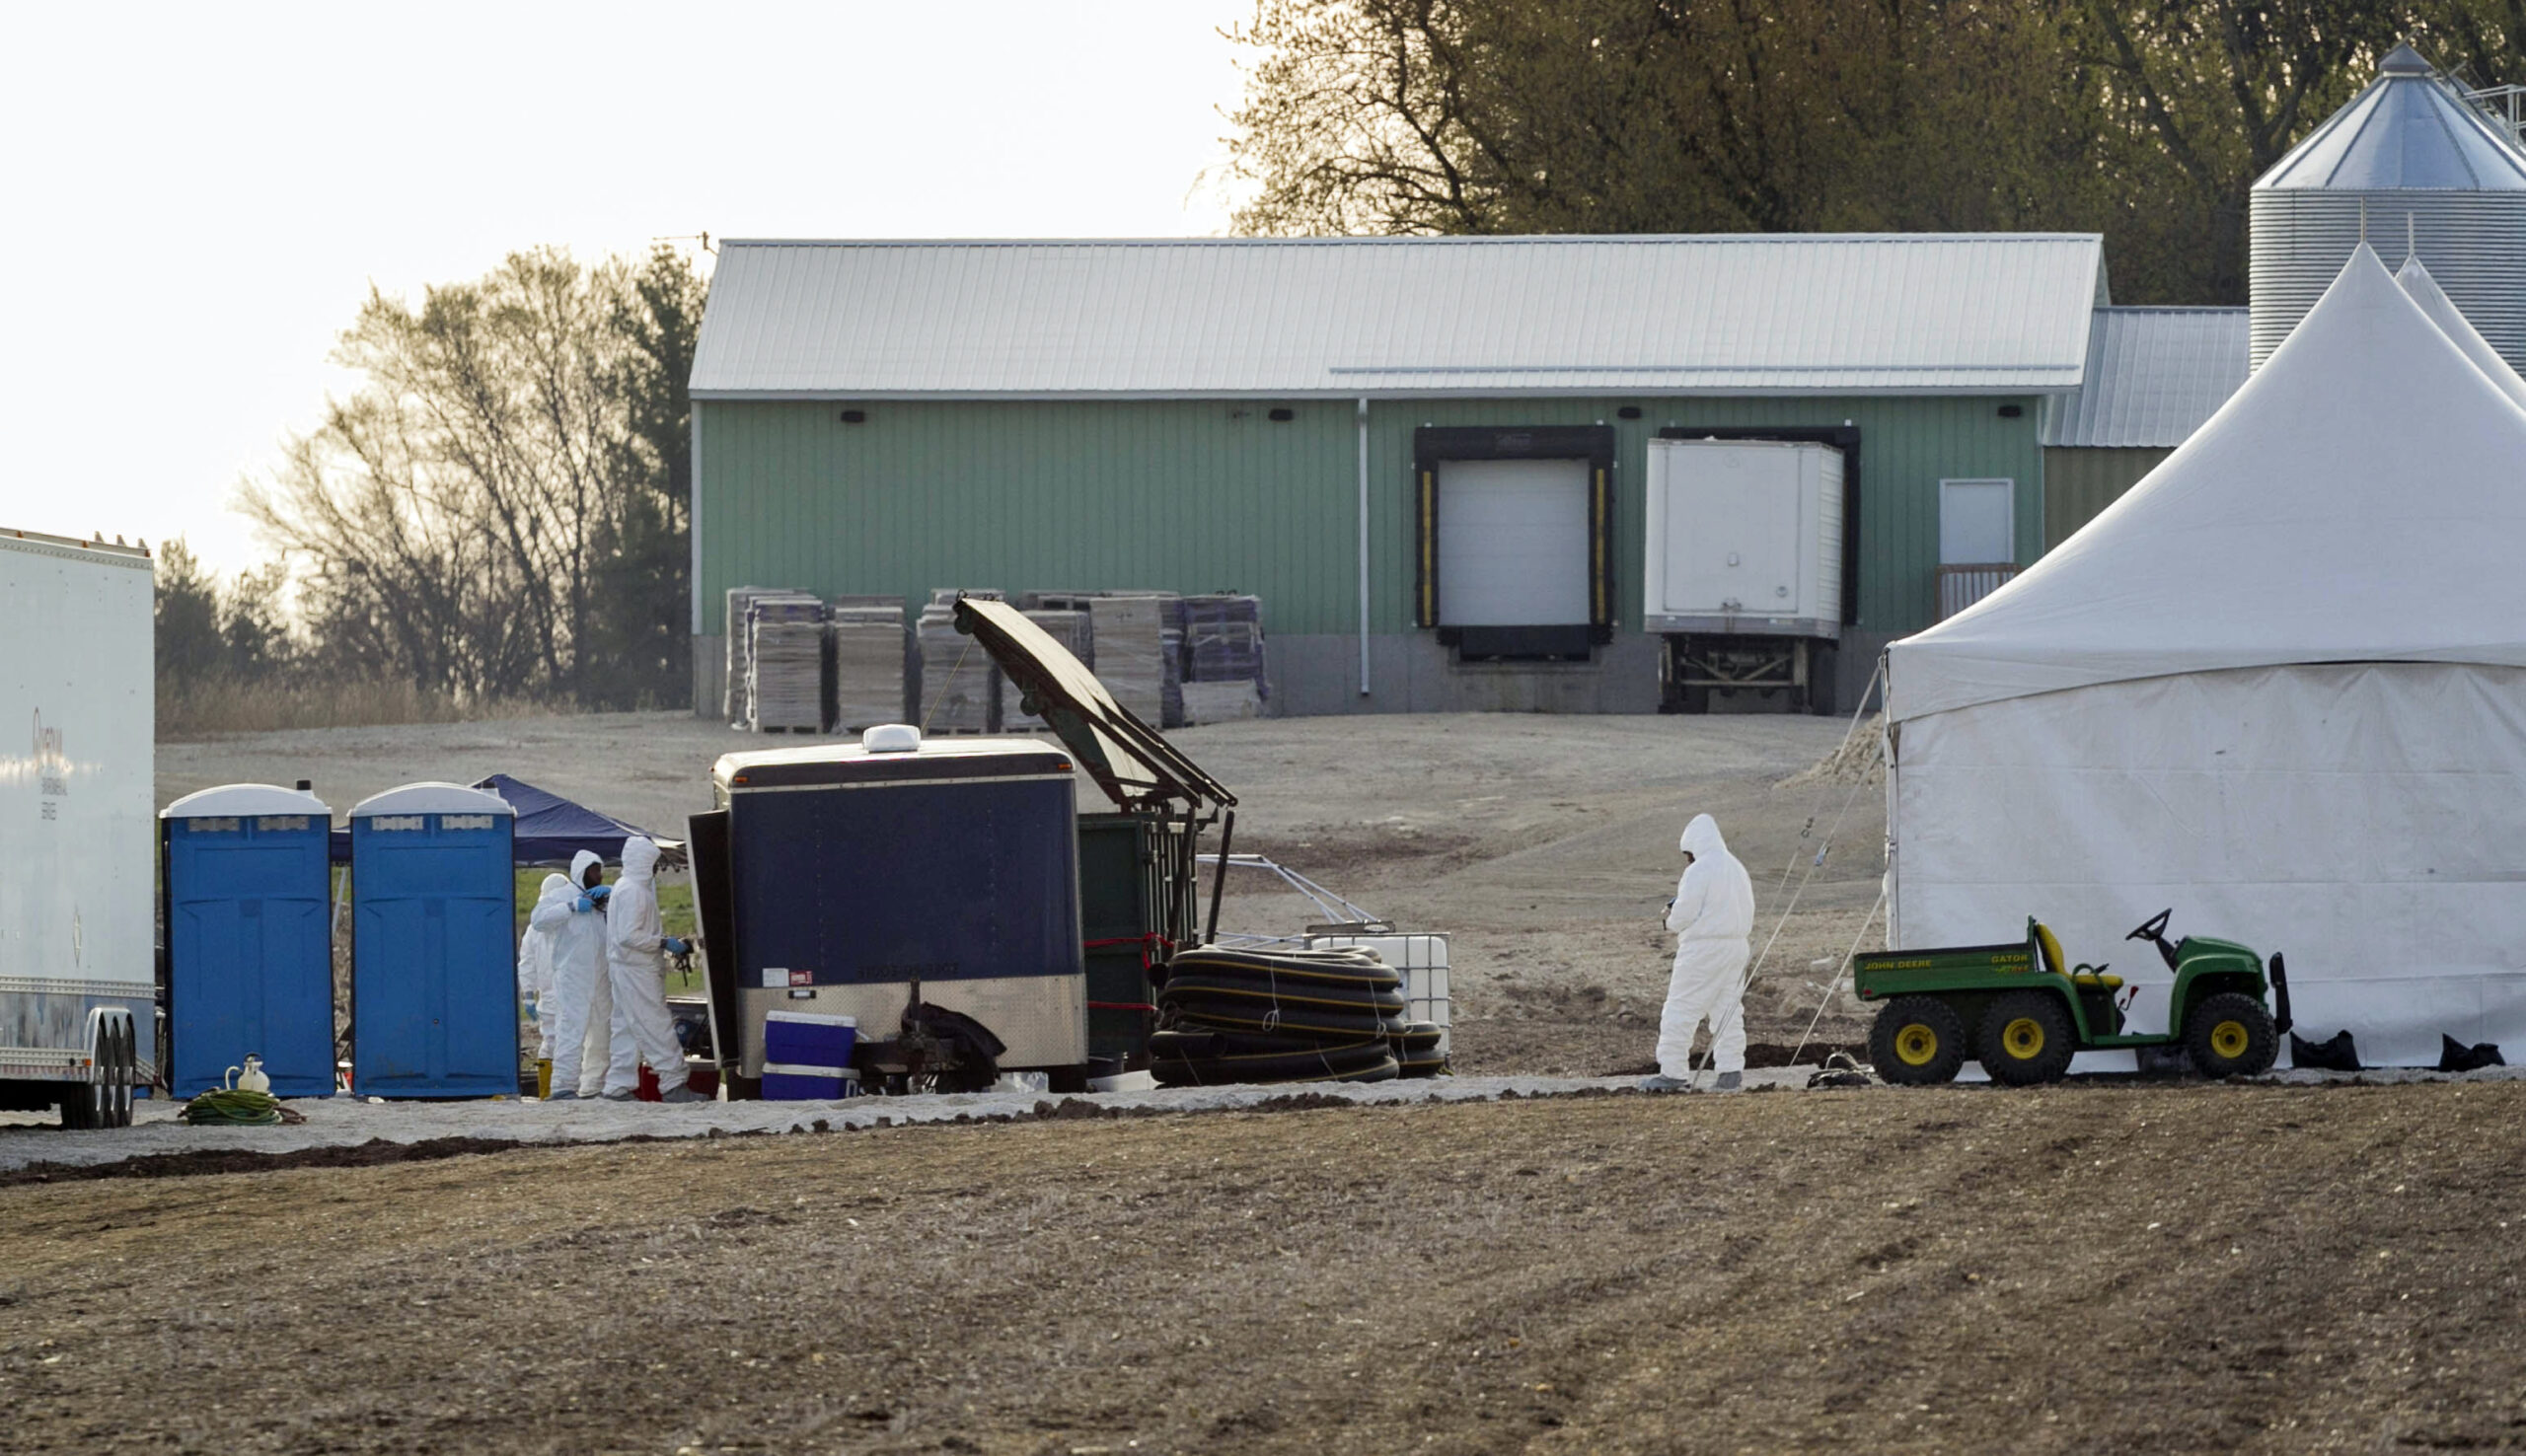 Workers in protective clothing work at a hen farm in Jefferson County in 2015 where an outbreak of avian flu had occurred.